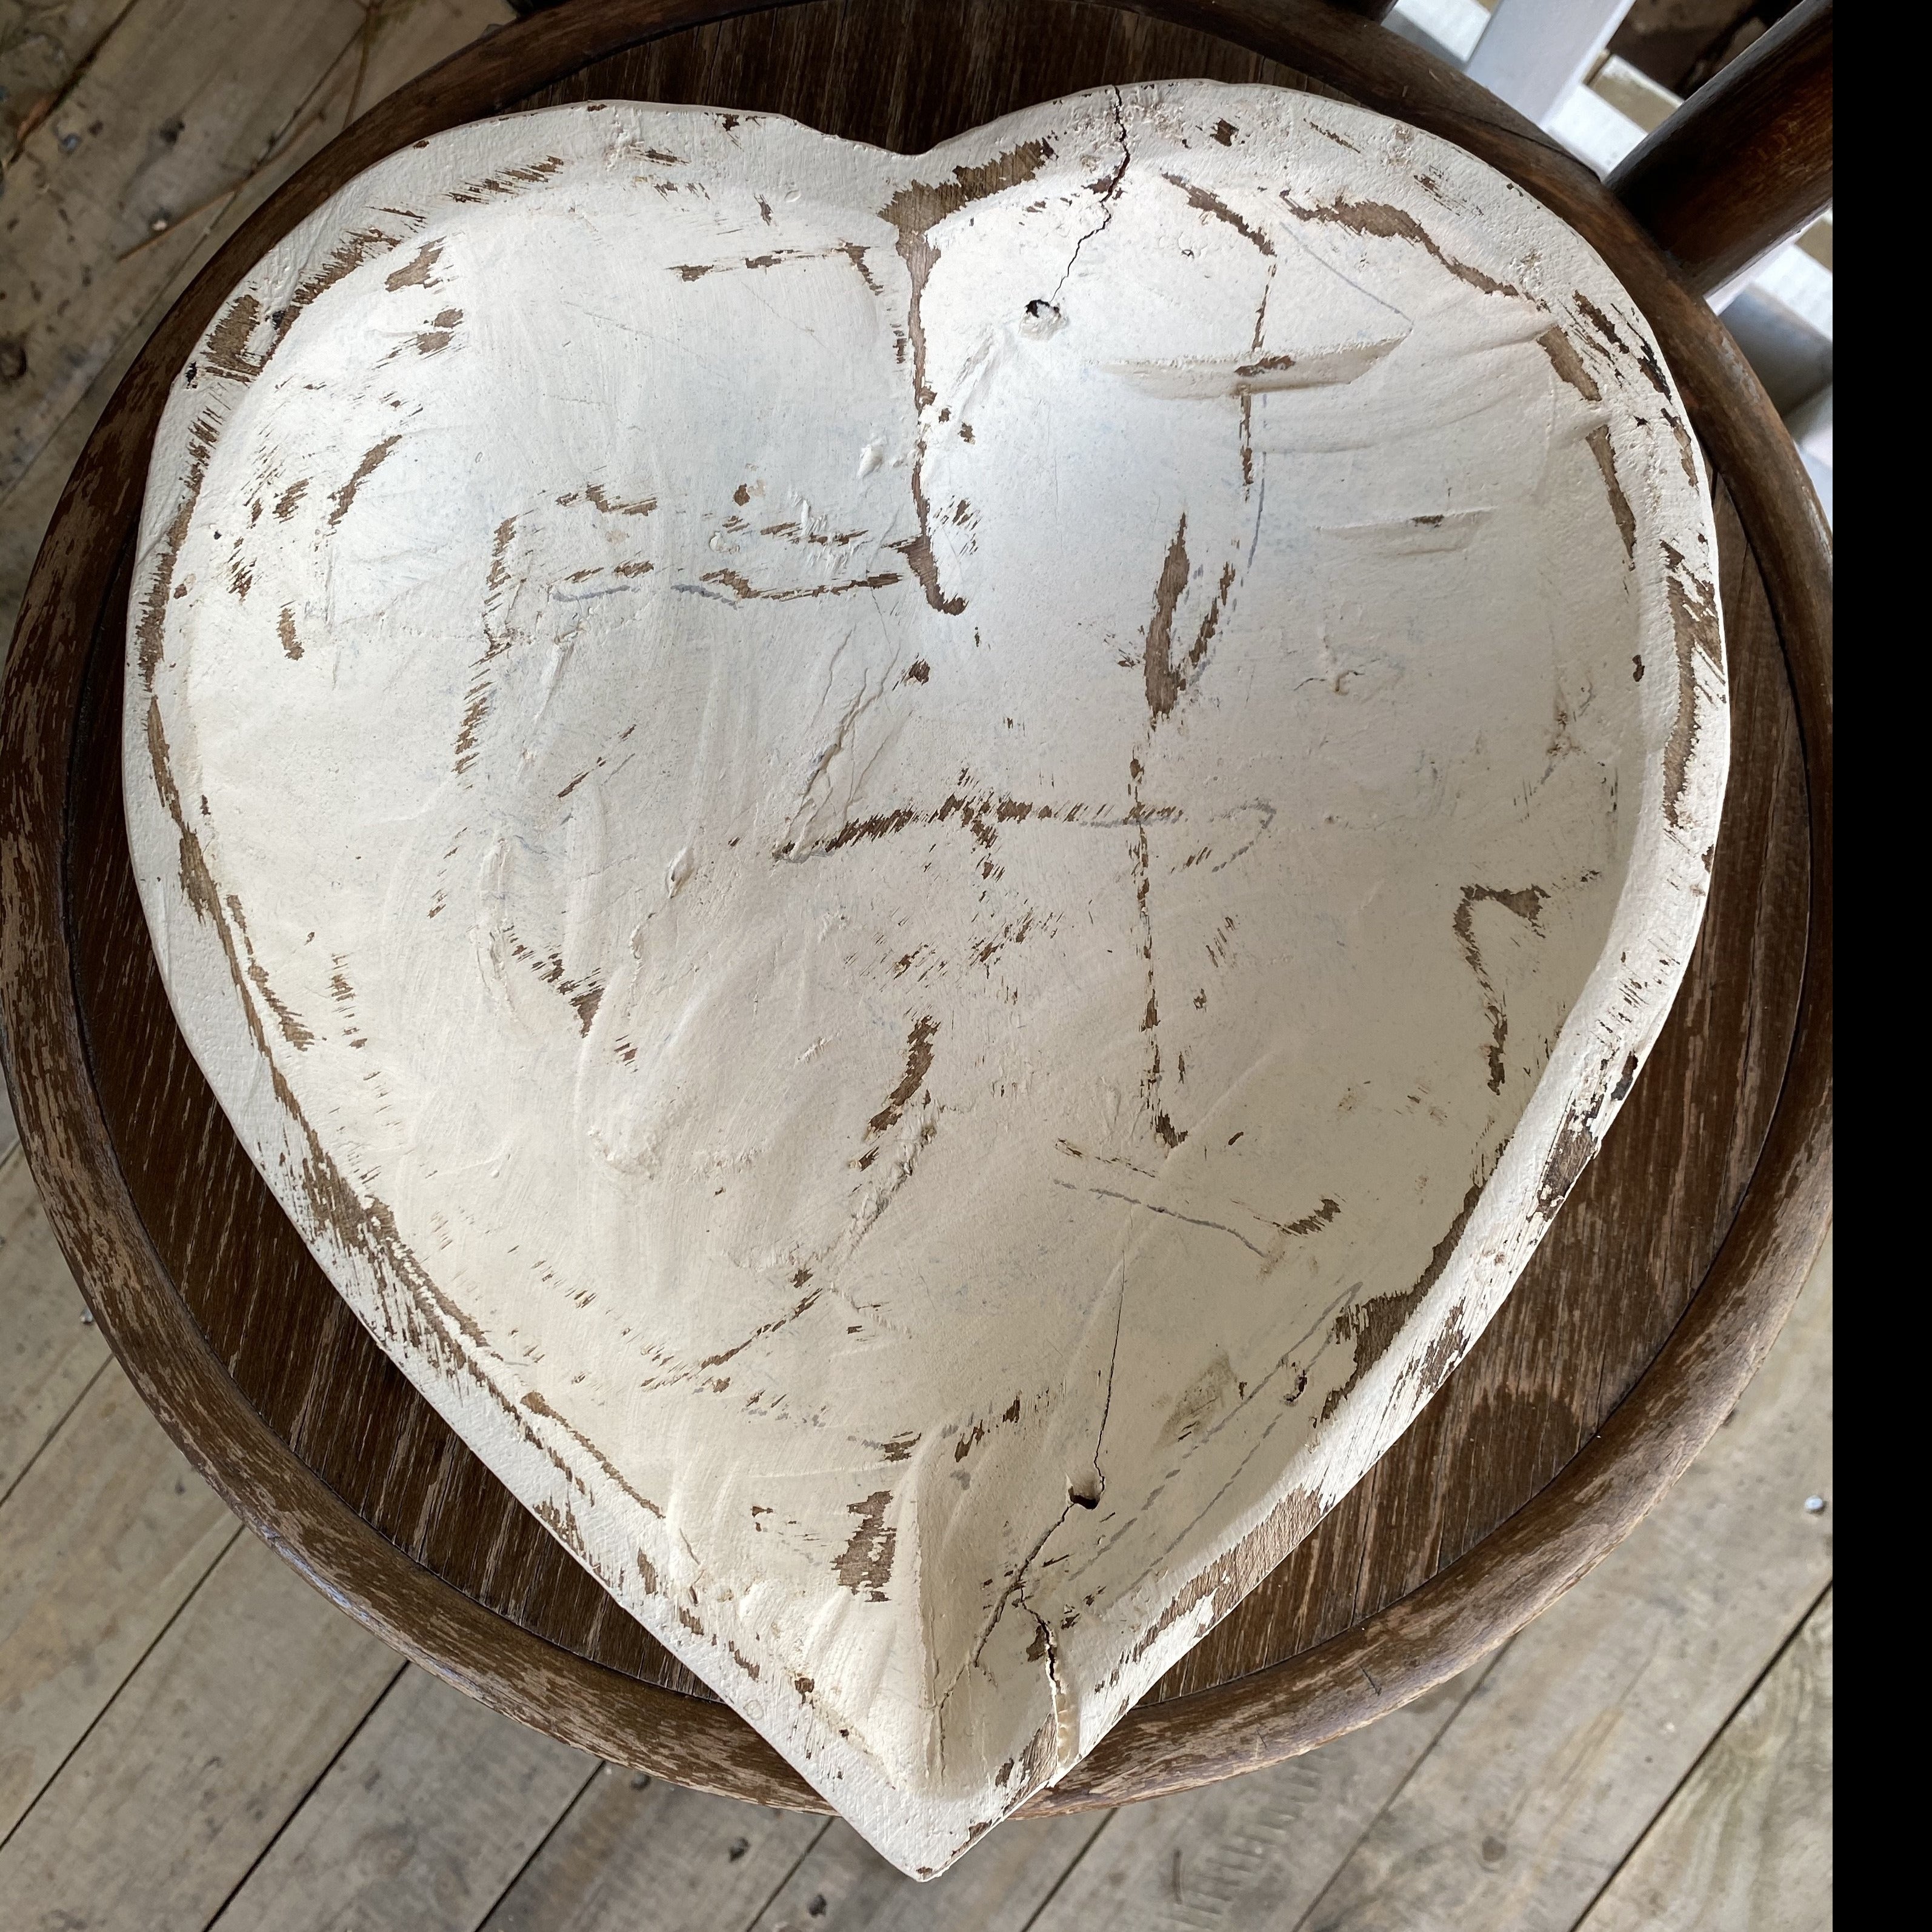 Heart shaped wooden dough bowl with white washed finish